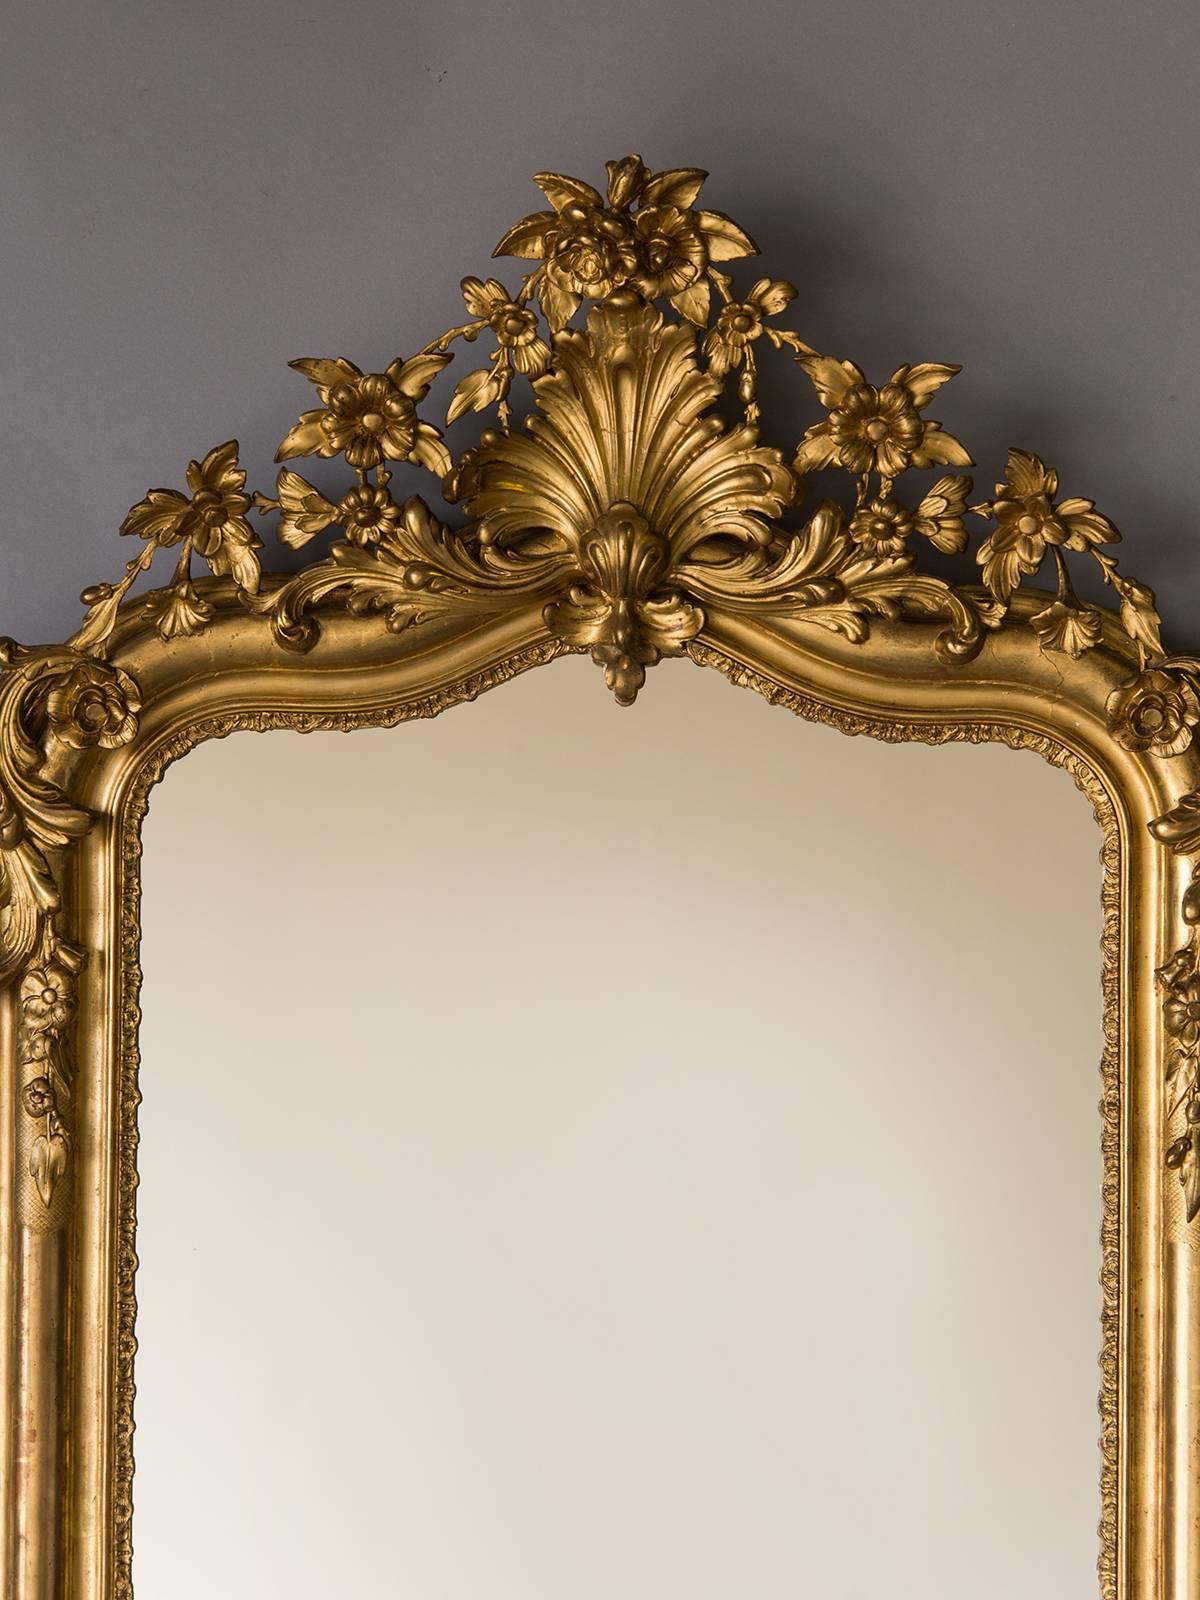 Receive our new selections direct from 1stdibs by email each week. Please click Follow Dealer below and see them first!

The superb decoration on this antique French, circa 1880 mirror is quite exceptional. The lavish cartouche at the top has a